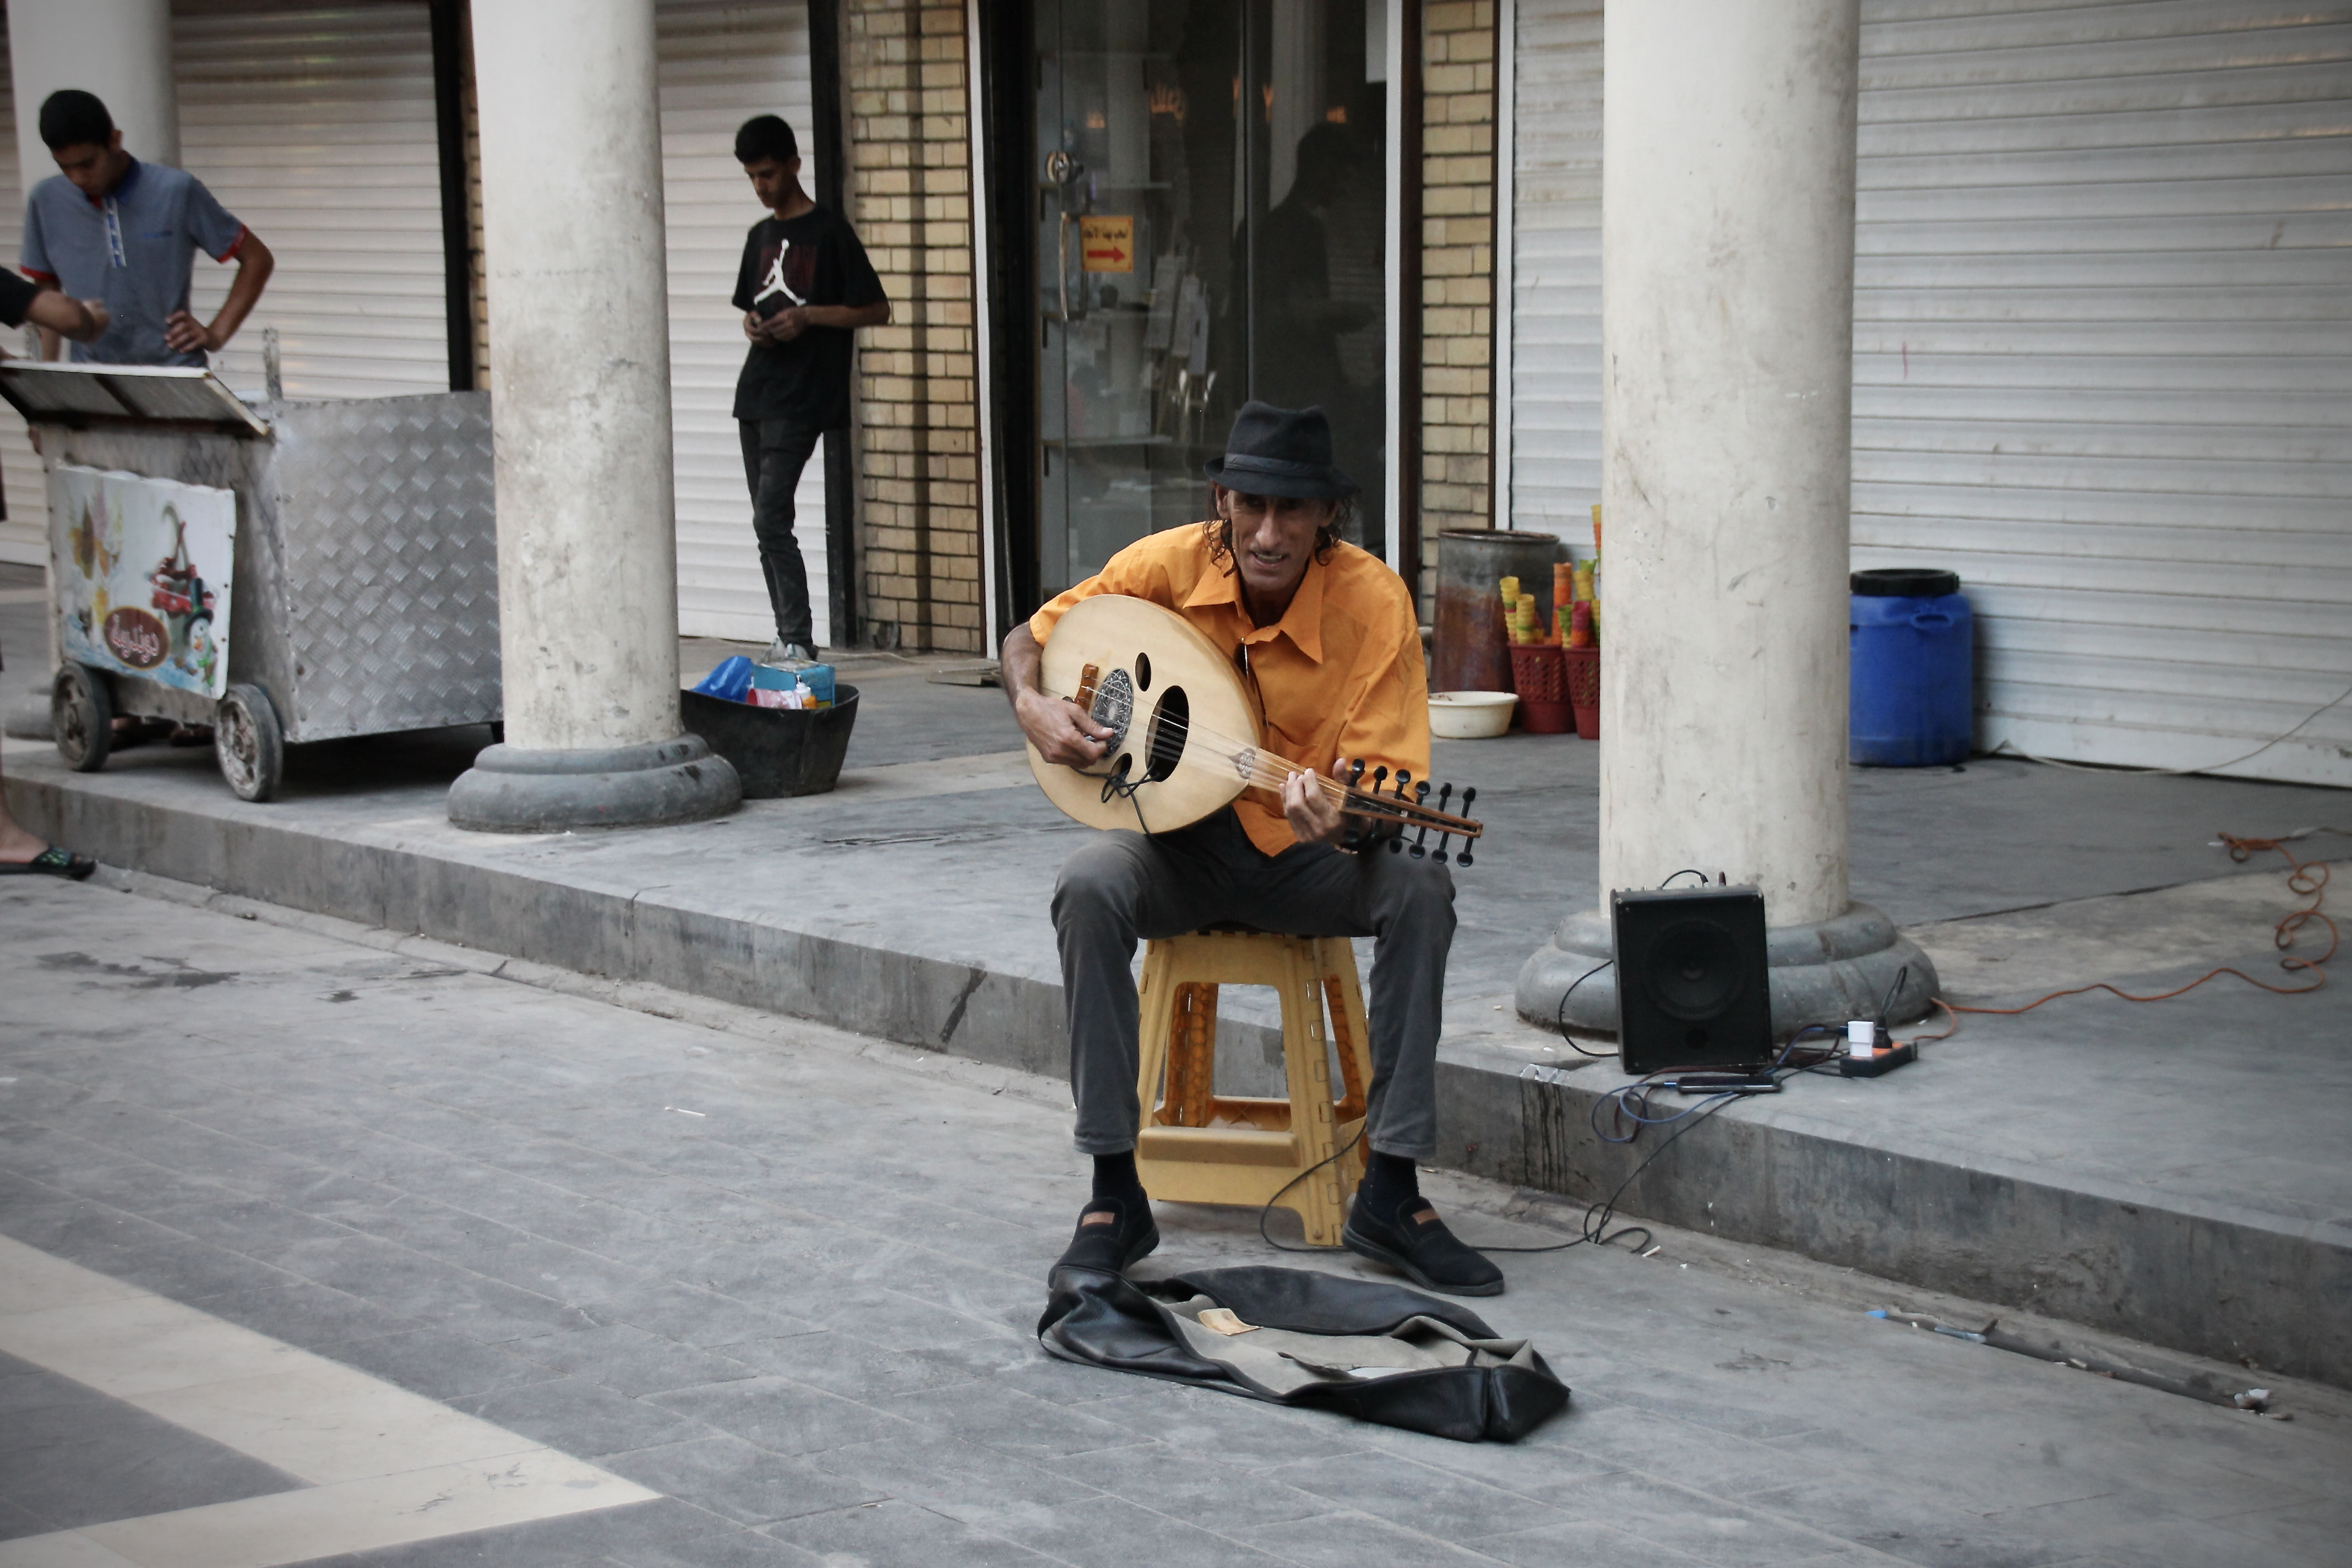 A street musician playing the oud, a traditional wooden instrument. Photo courtesy of the author.